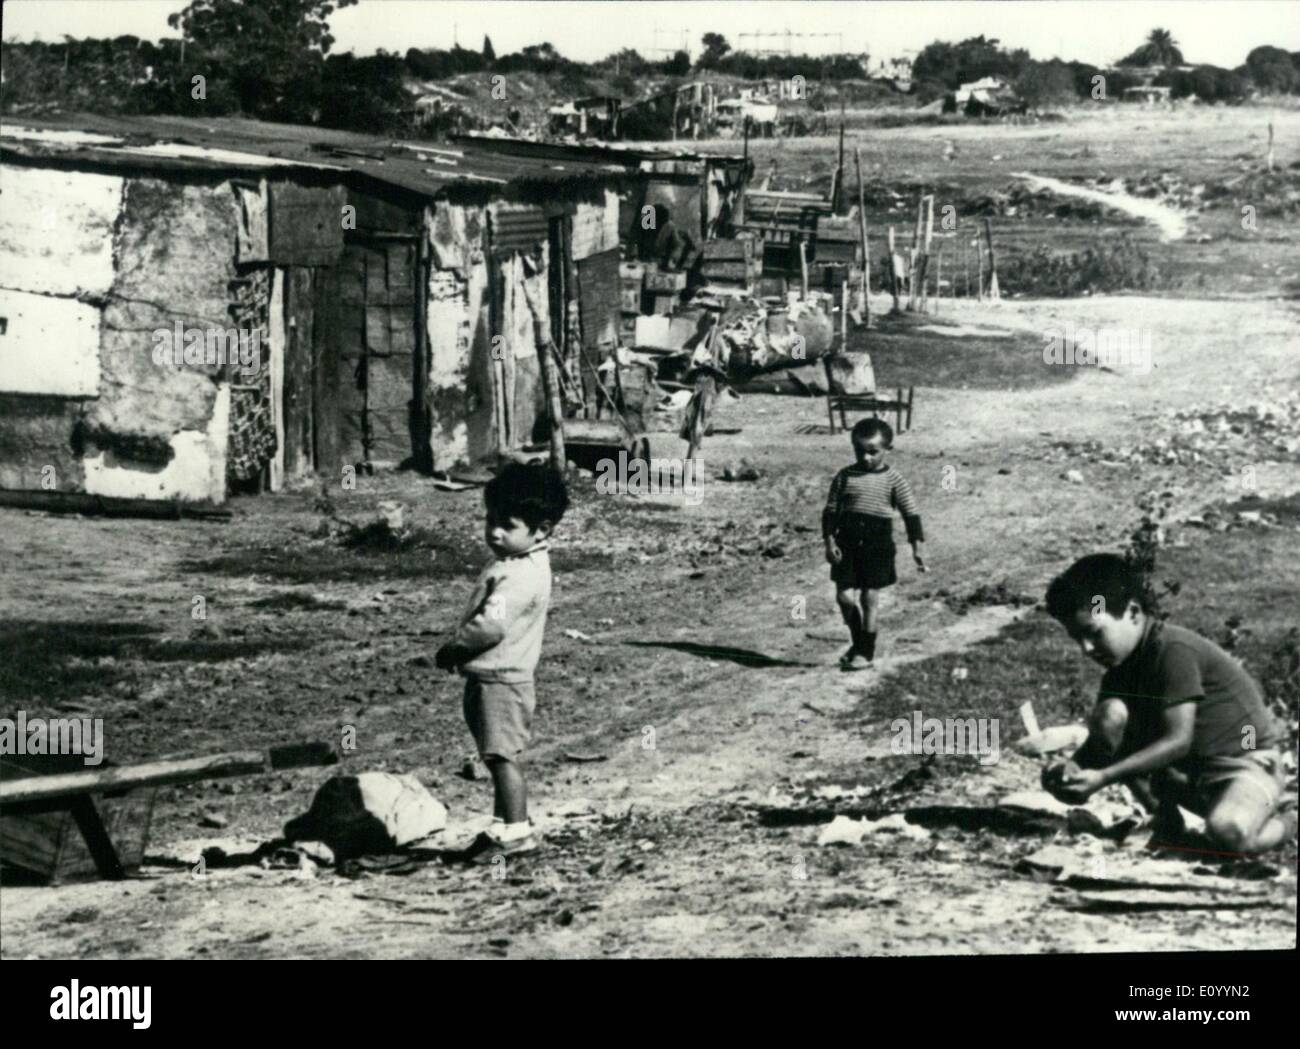 Dec. 12, 1971 - Uruguay-Montevideo's ''Cantegrill'' slums: ''Don't push any more because it's going to bust. Here in the ''cantegril'' we'll soon realize there are two hundred thousand of us, Stock Photo